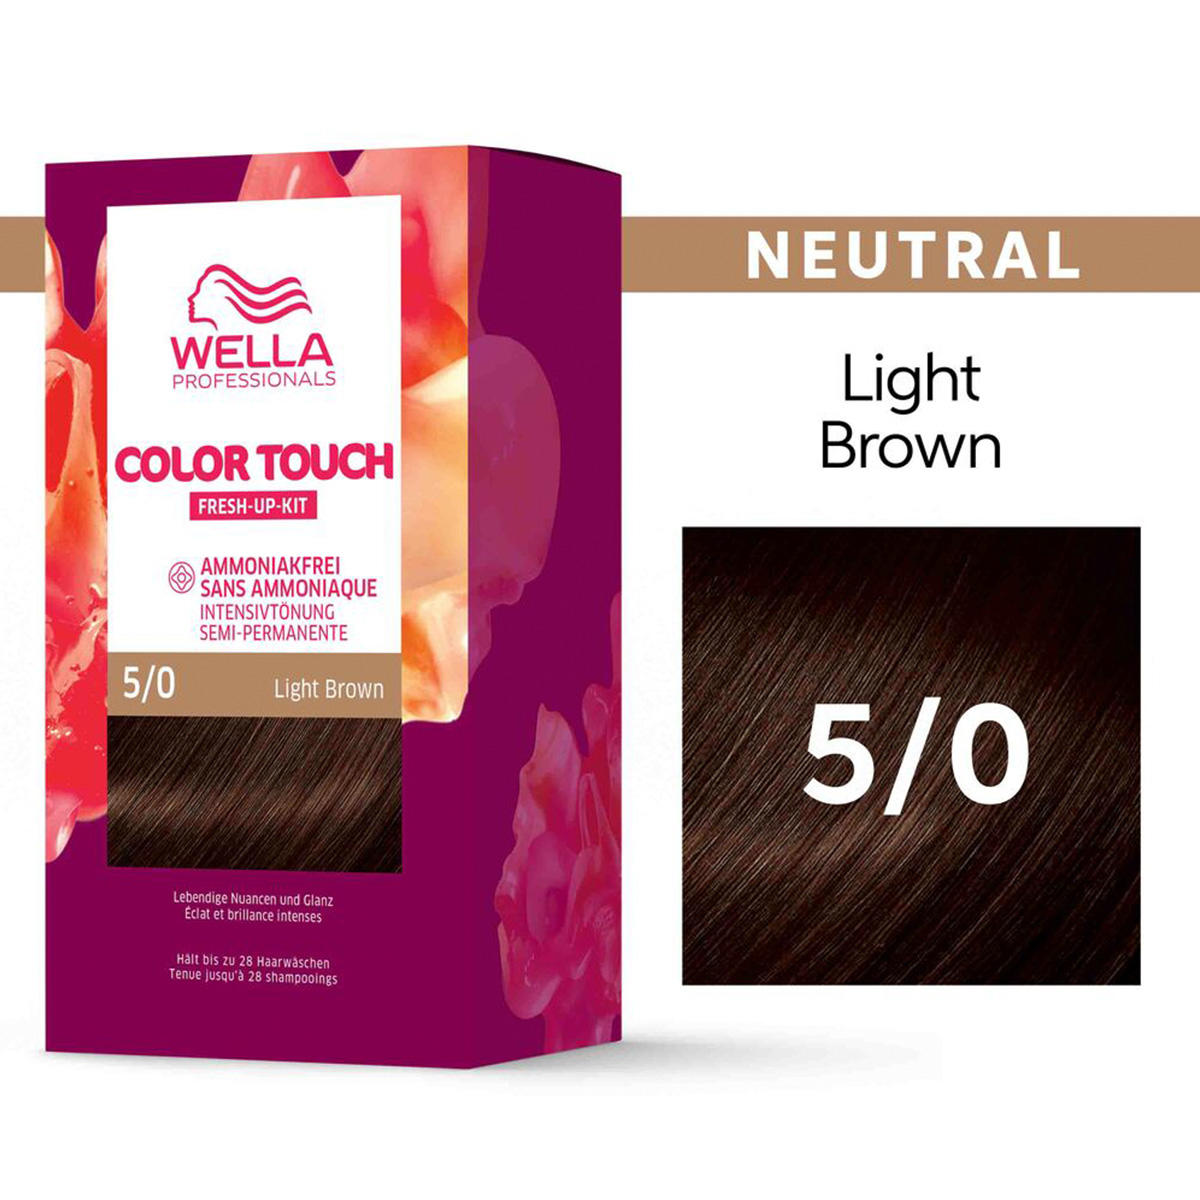 Wella Color Touch Fresh-Up-Kit 5/0 Light Brown - 2